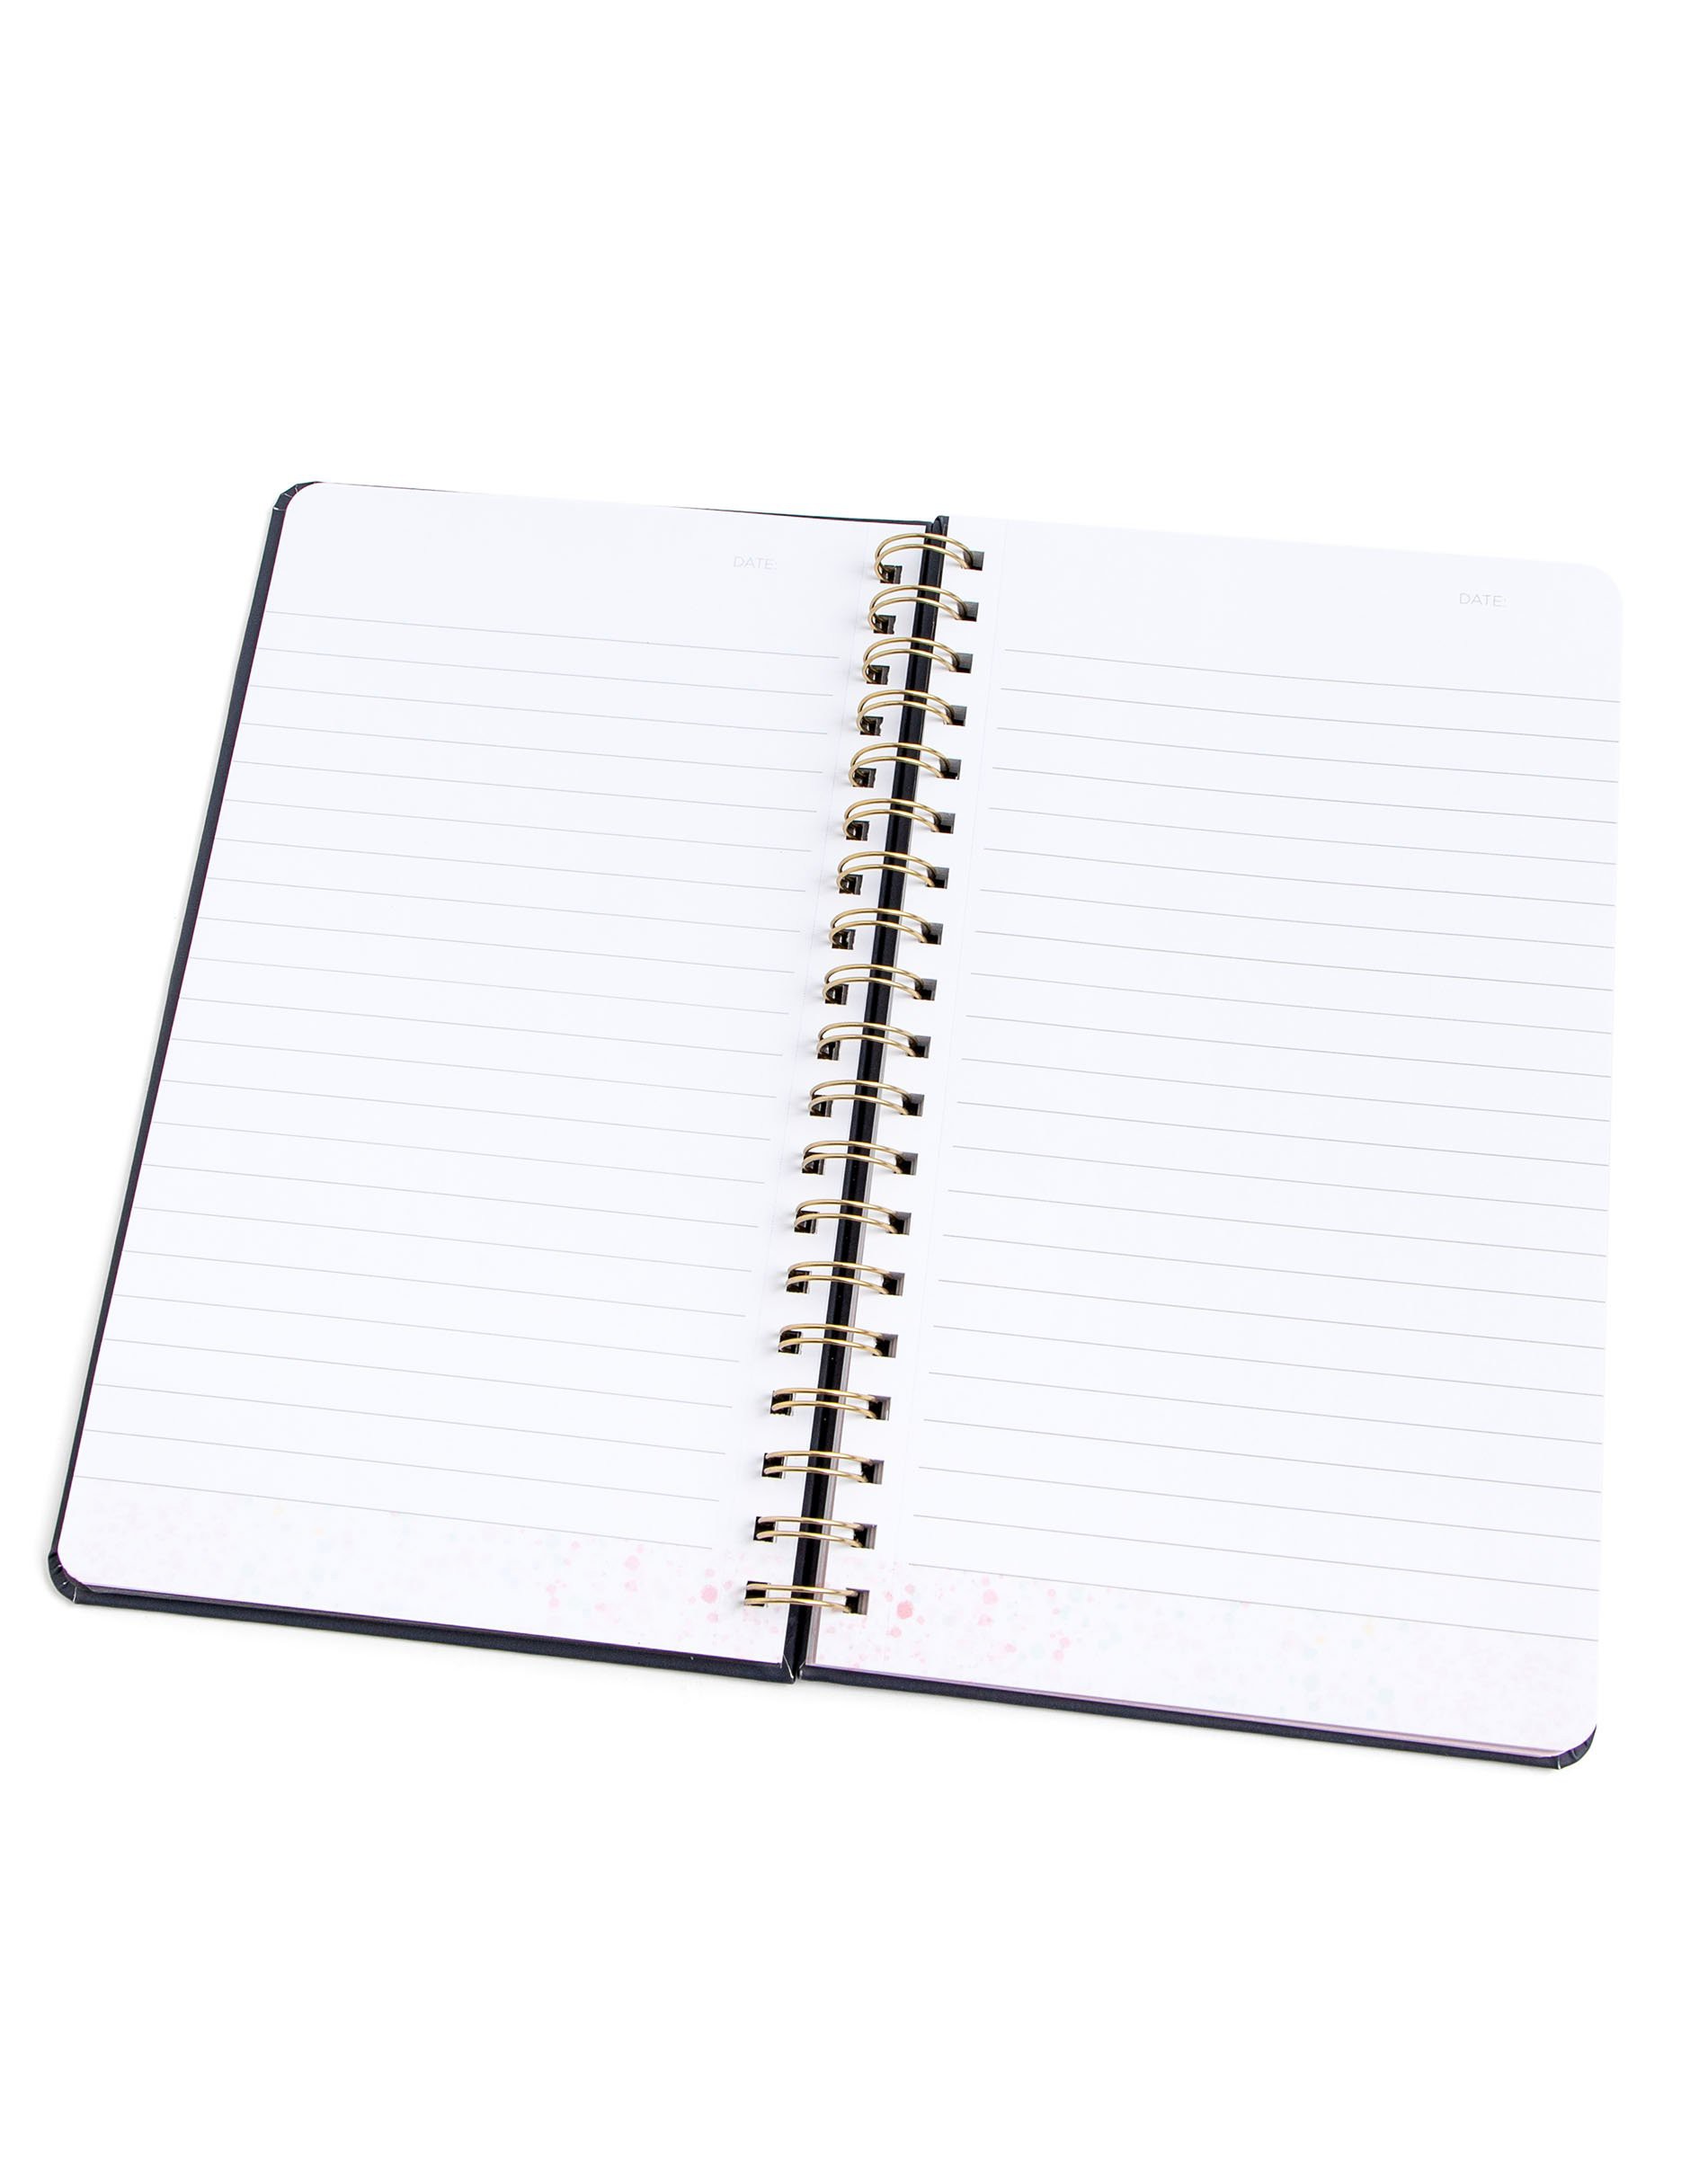 Write Me (Blank) Spiral Notebook for Sale by seacargocollect